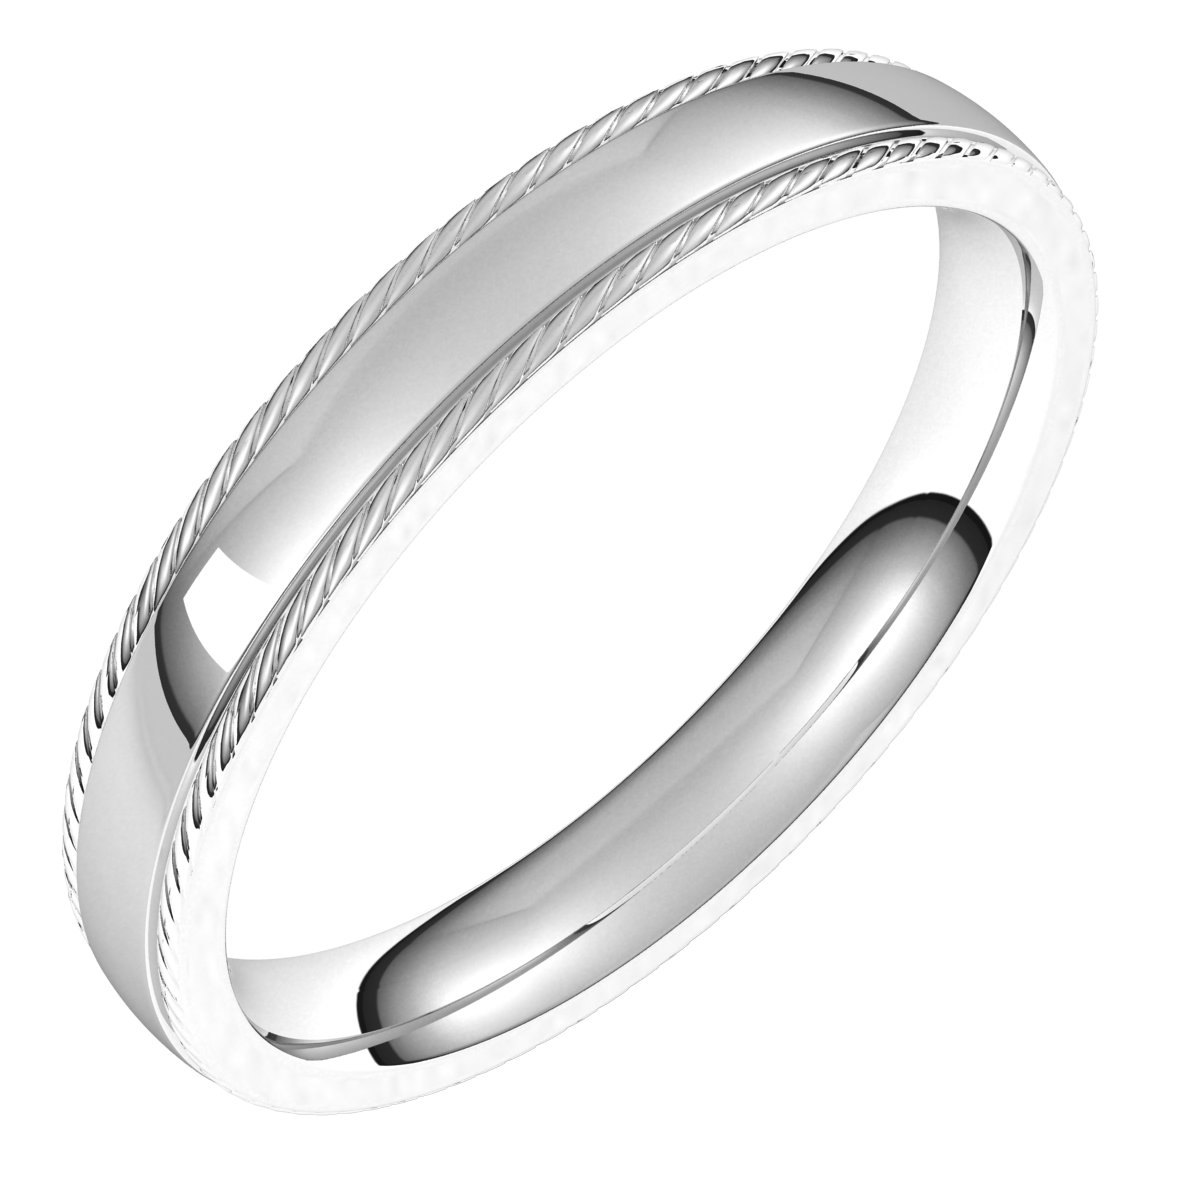 Sterling Silver 3 mm Rope Half Round Comfort Fit Band Size 10.5 Ref 16140013